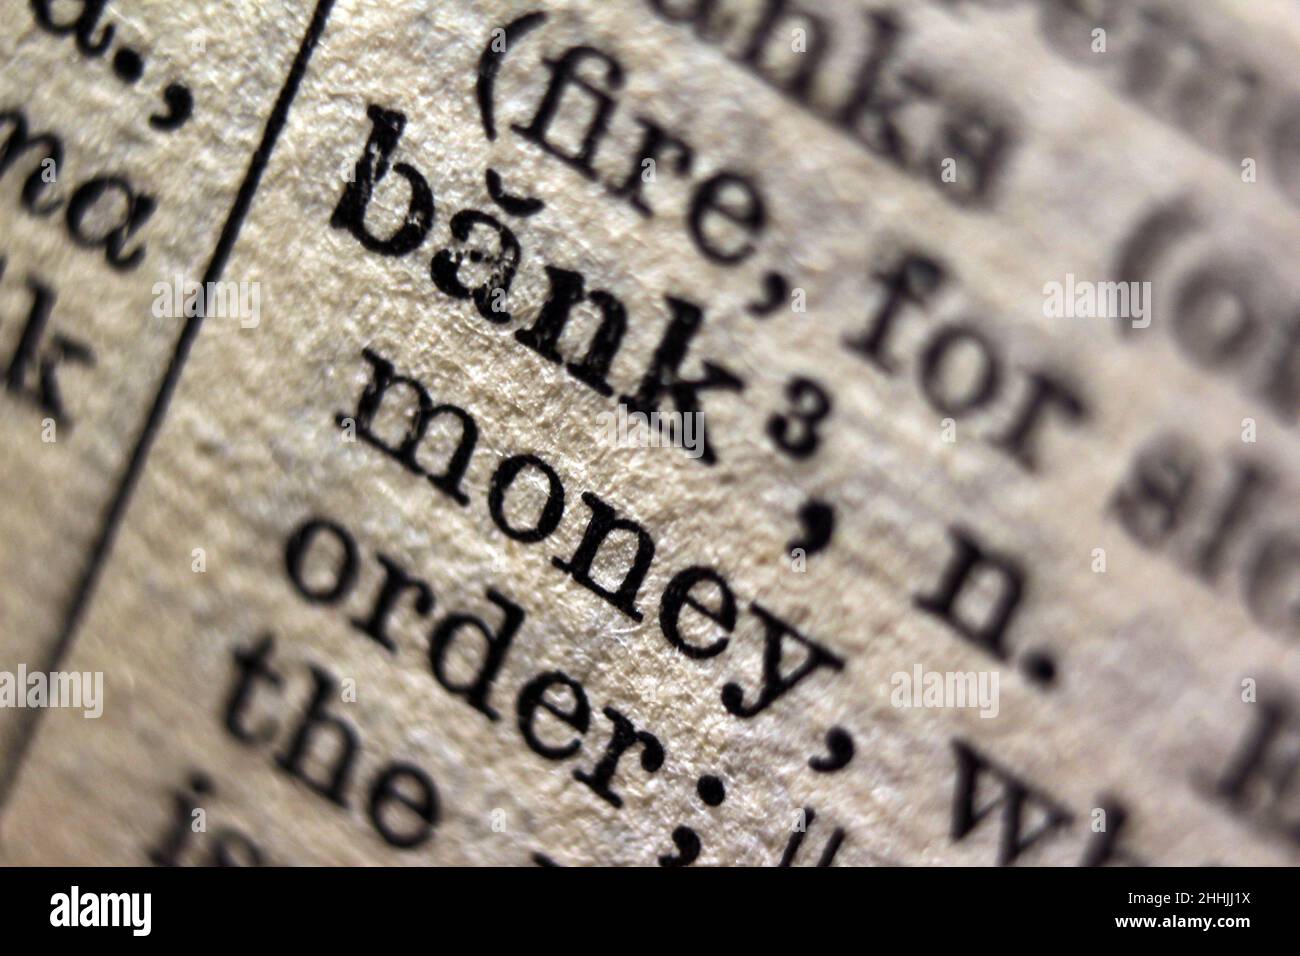 Word 'bank' printed on dictionary page, macro close-up Stock Photo